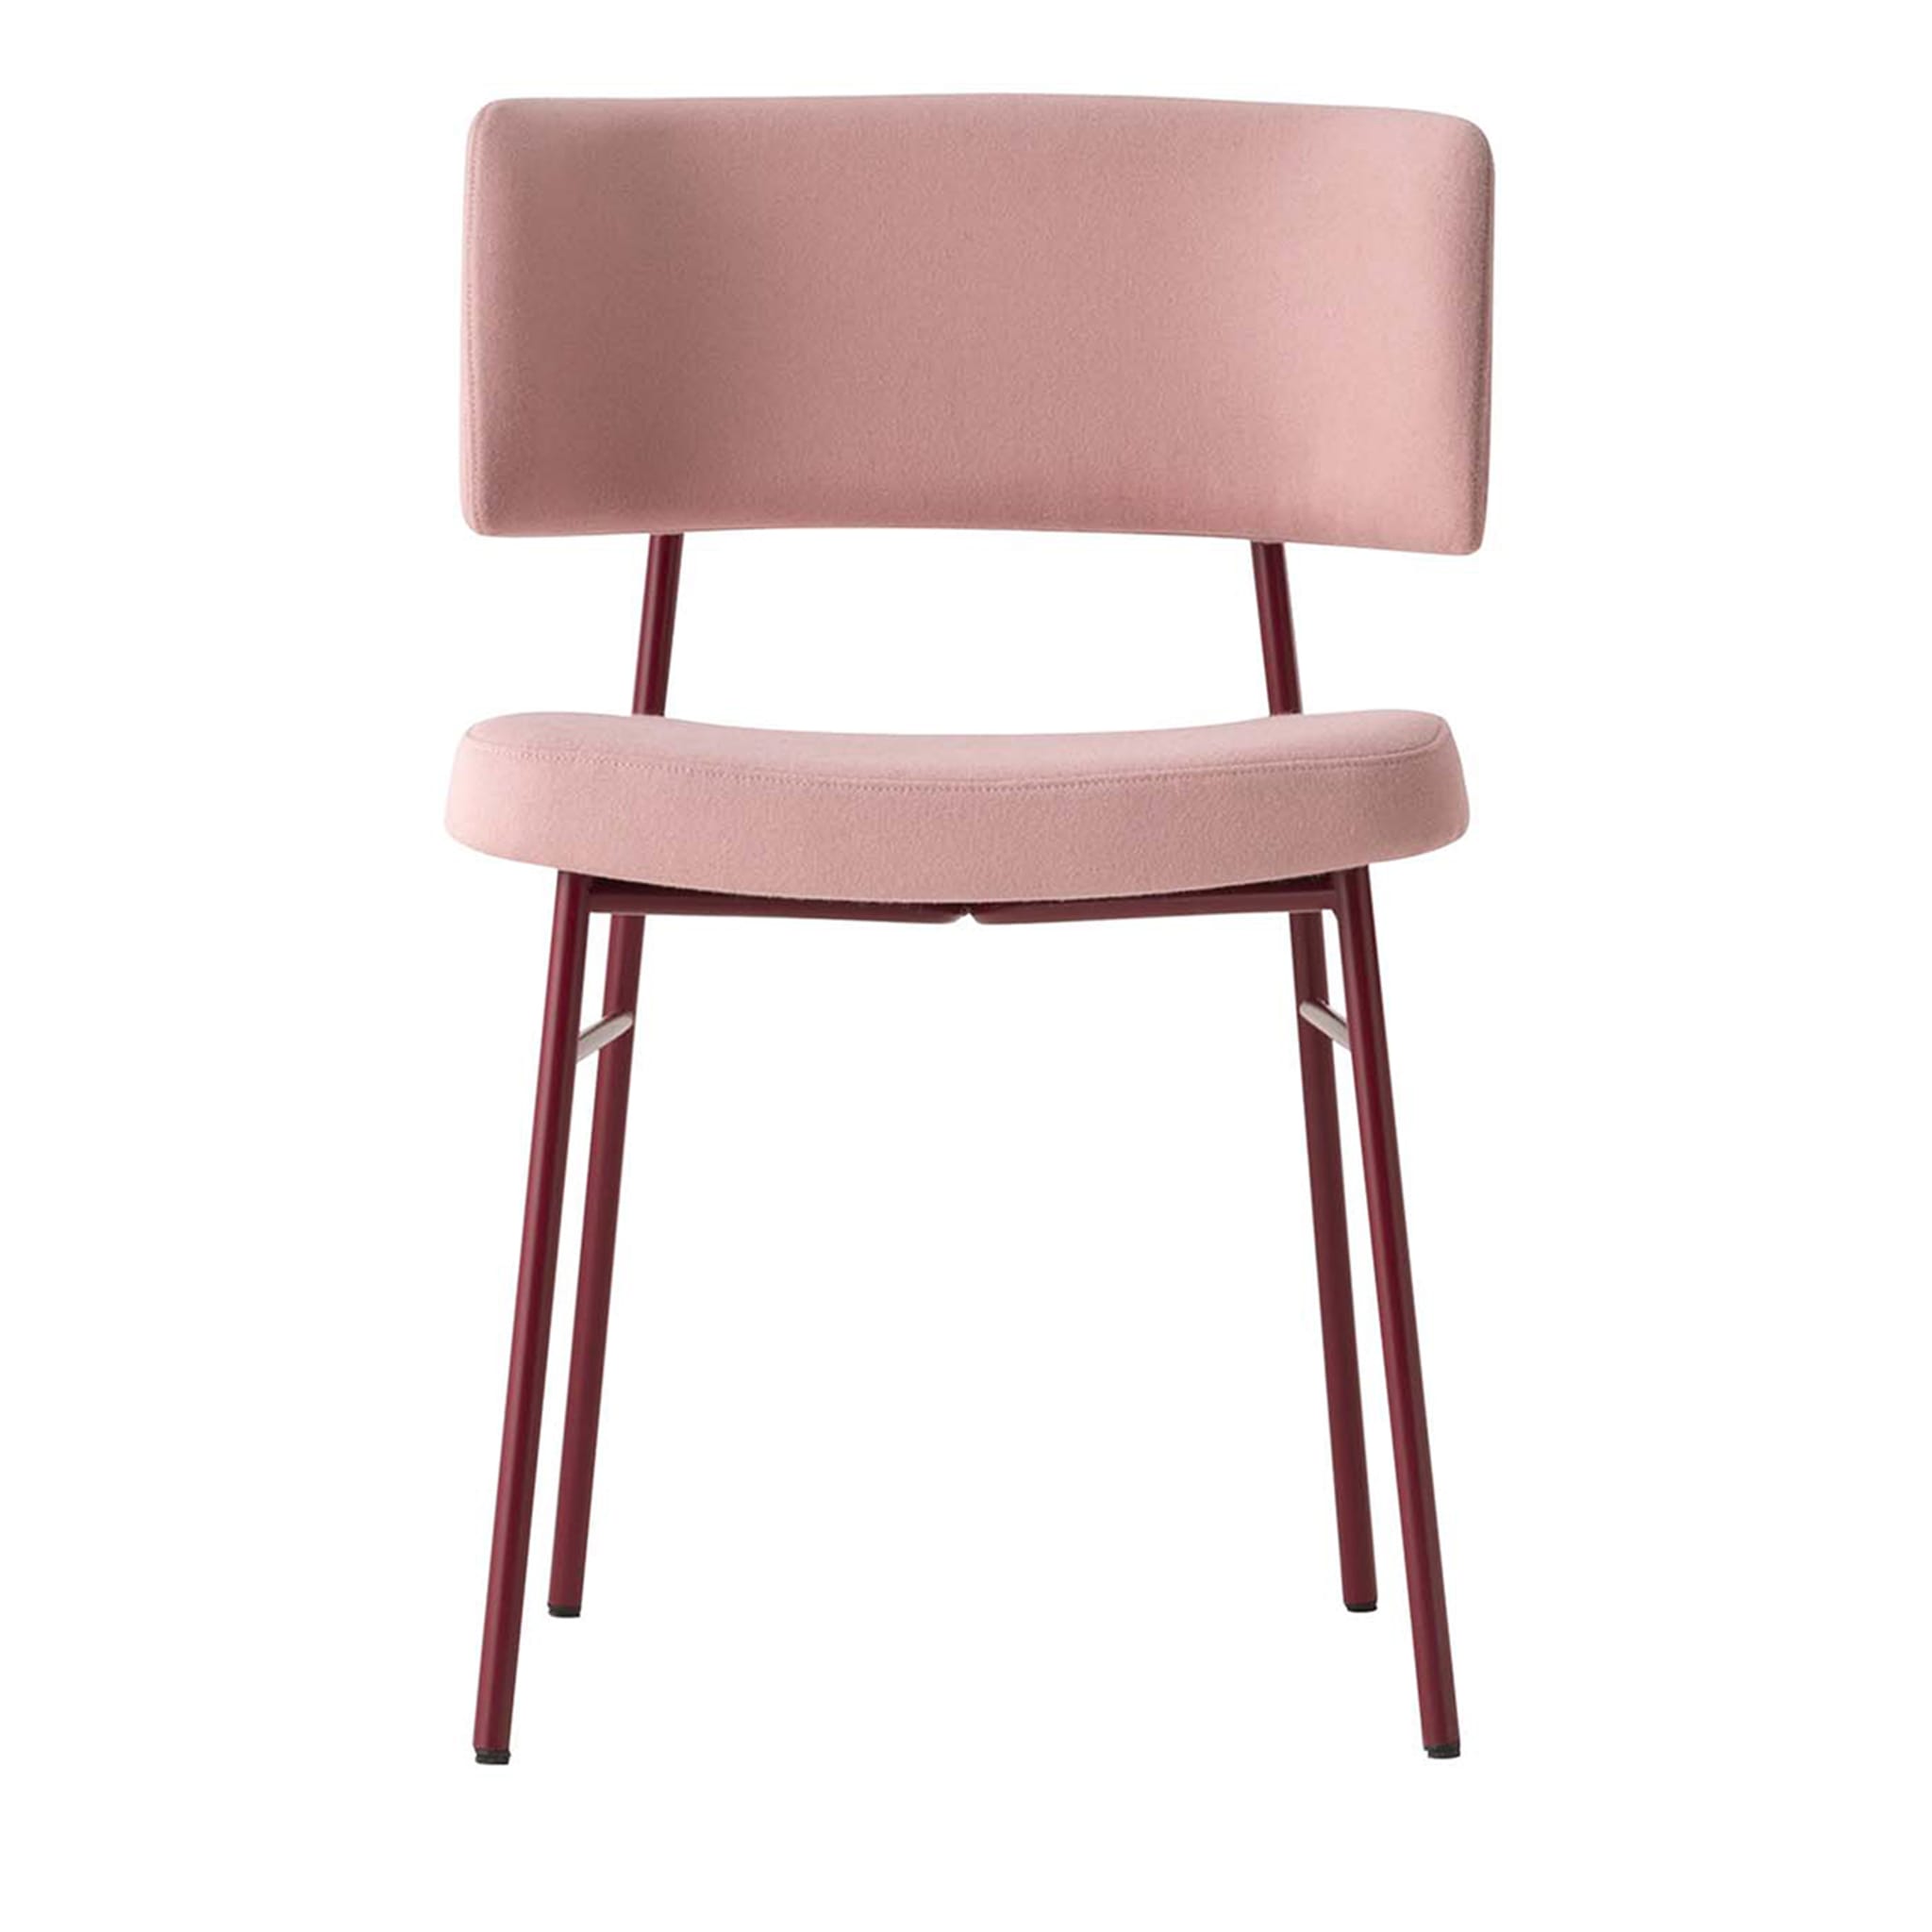 Marlen Pink and Burgundy Chair by EP Studio - Main view